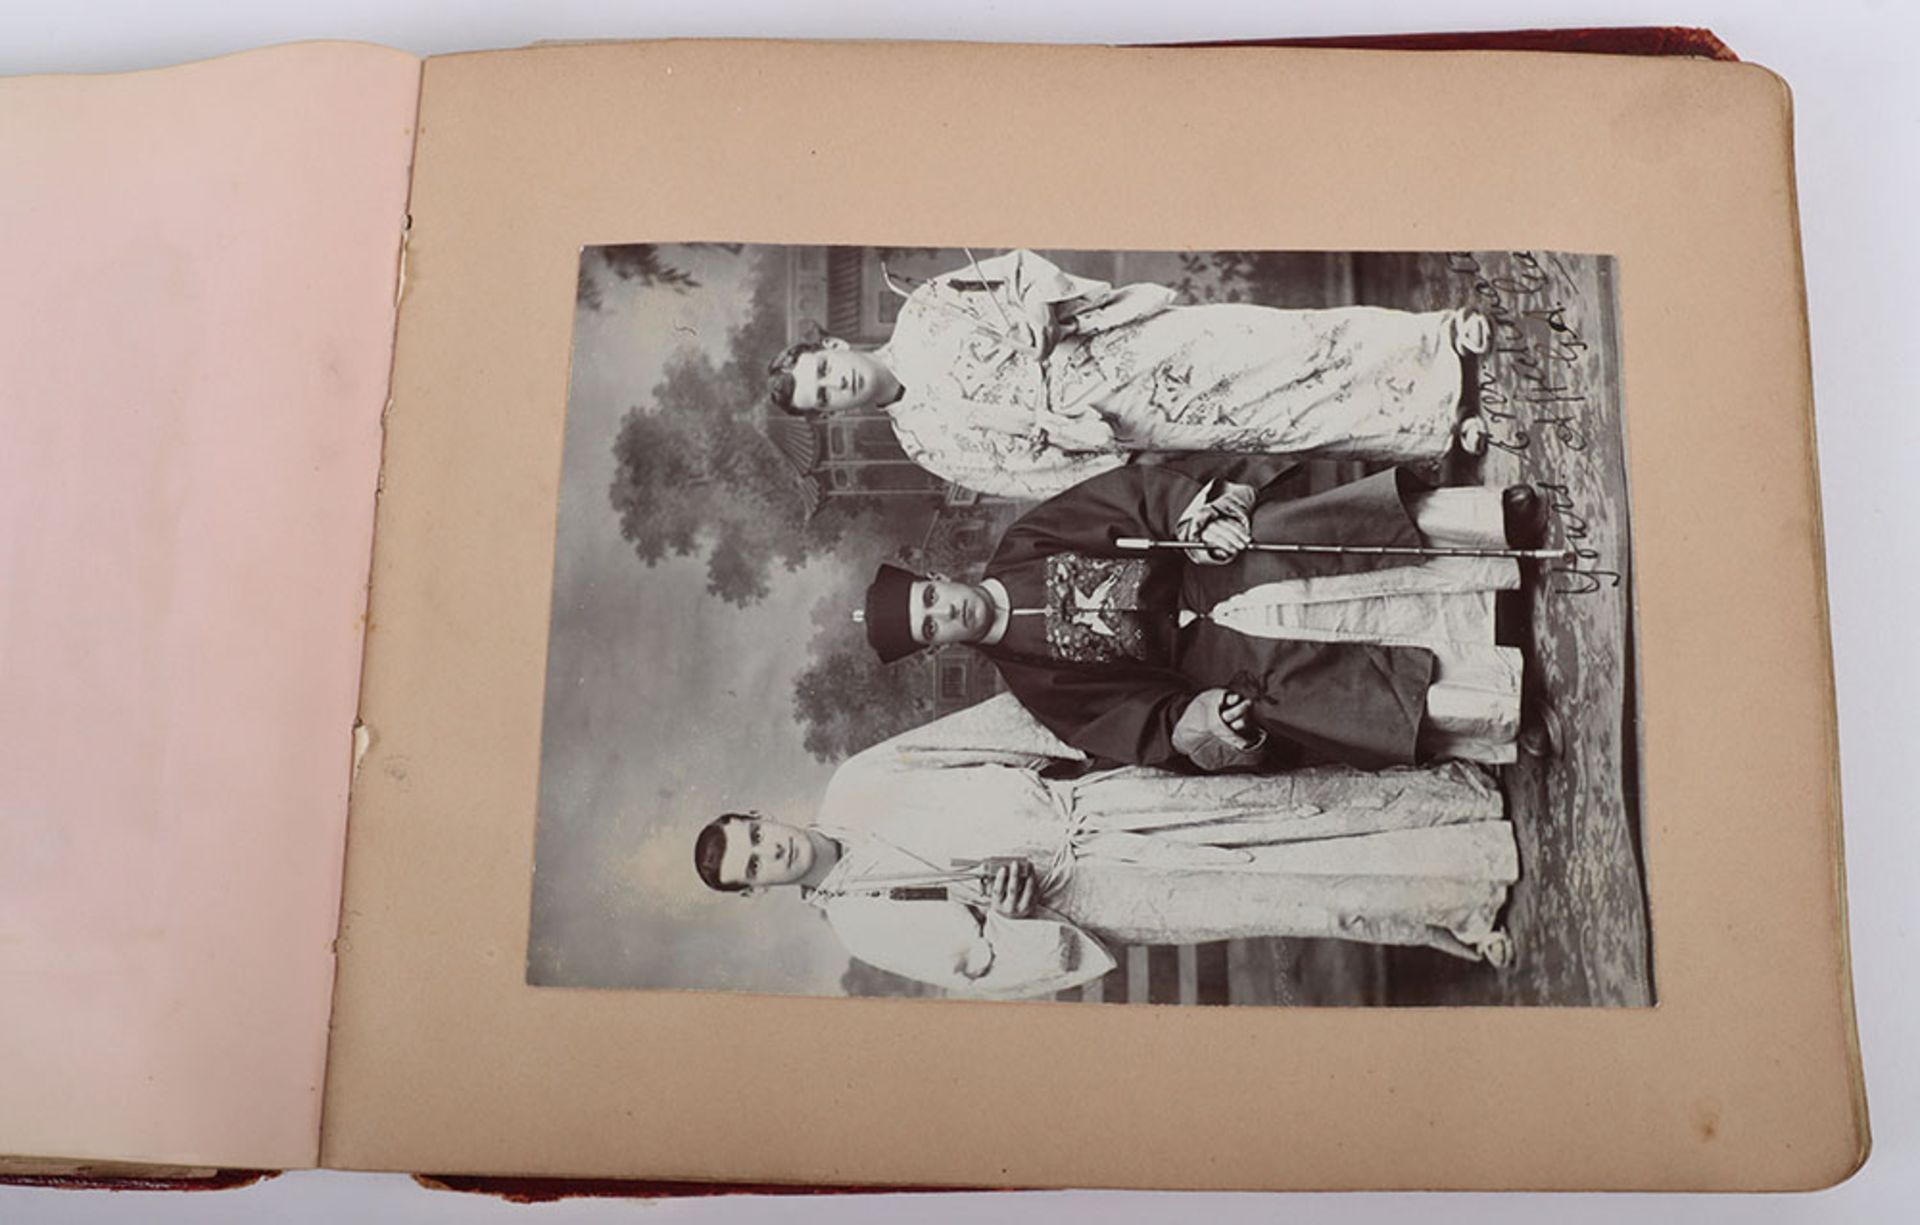 Photograph Album with images of ther Delhi Durbar, troops lining streets, Elephants, sacred cows bel - Image 36 of 48